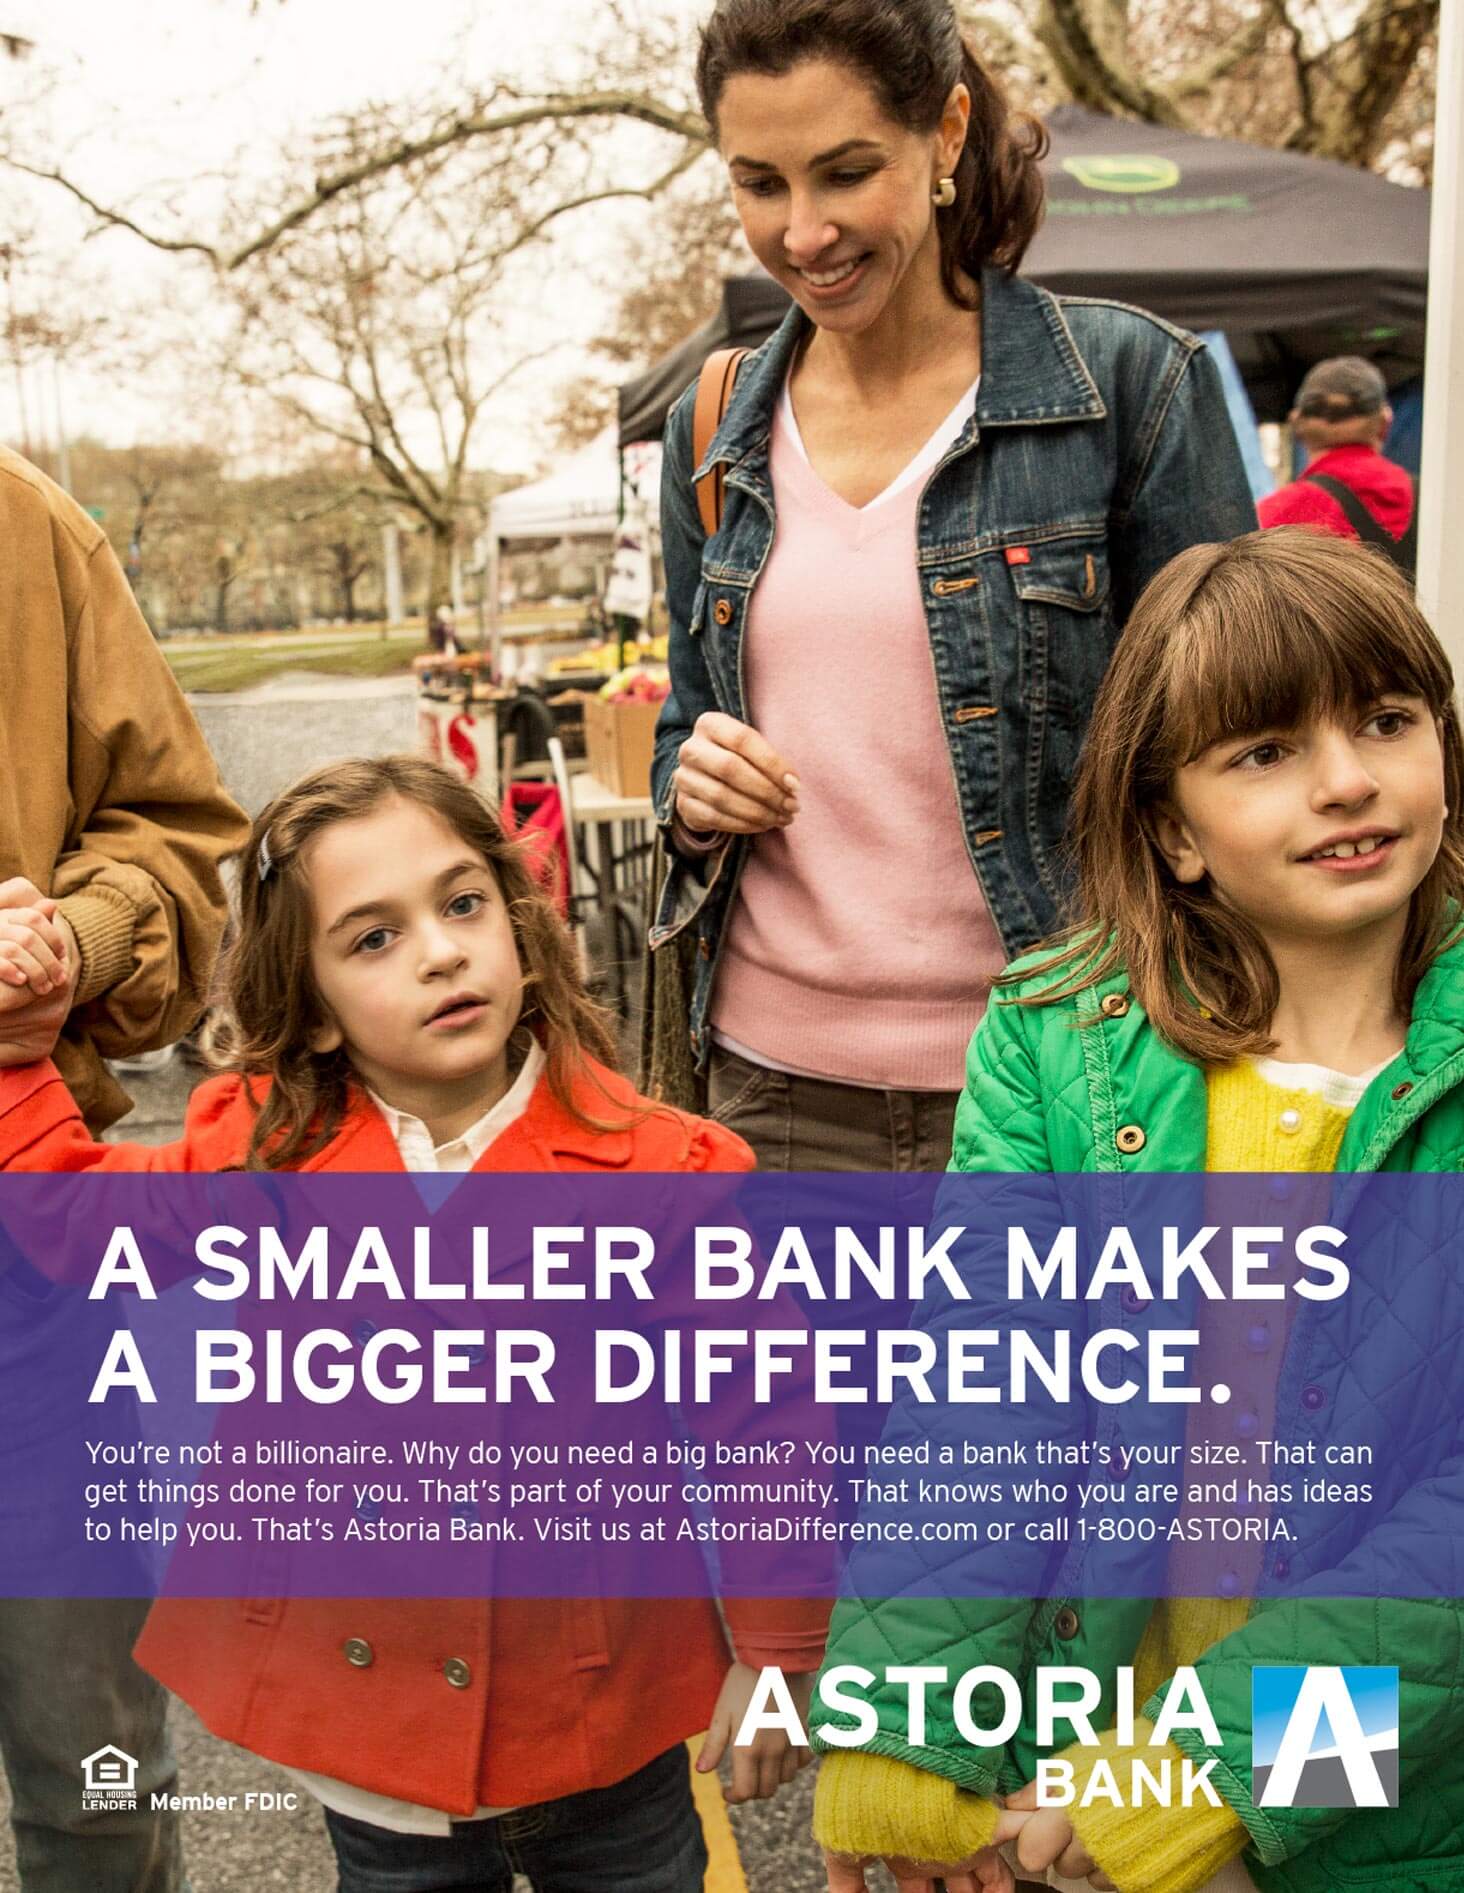 Astoria Bank. When you love what you do, you just do it better